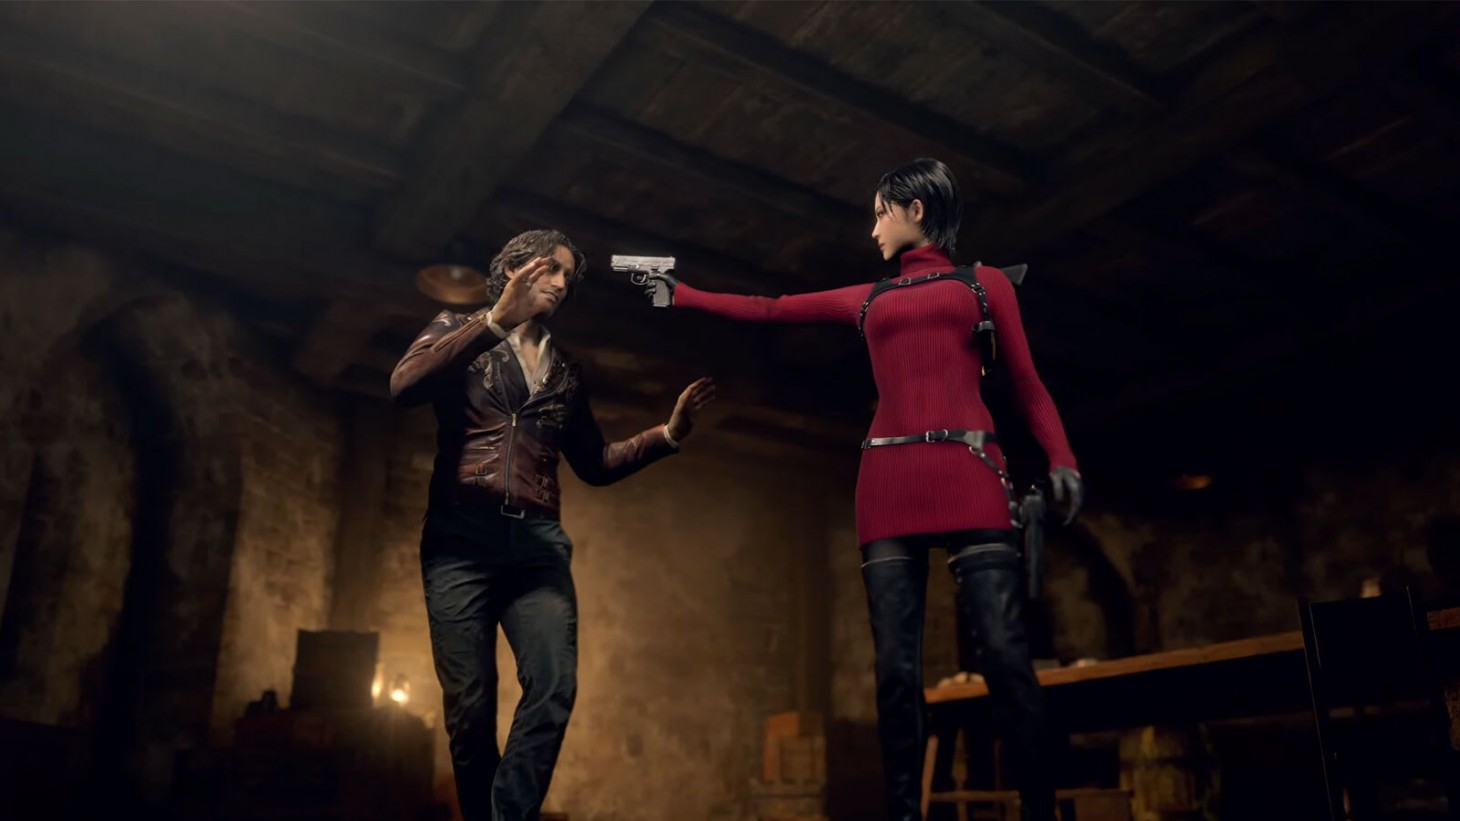 Resident Evil 4 Remake Ada Wong - Who's the Voice Actor?